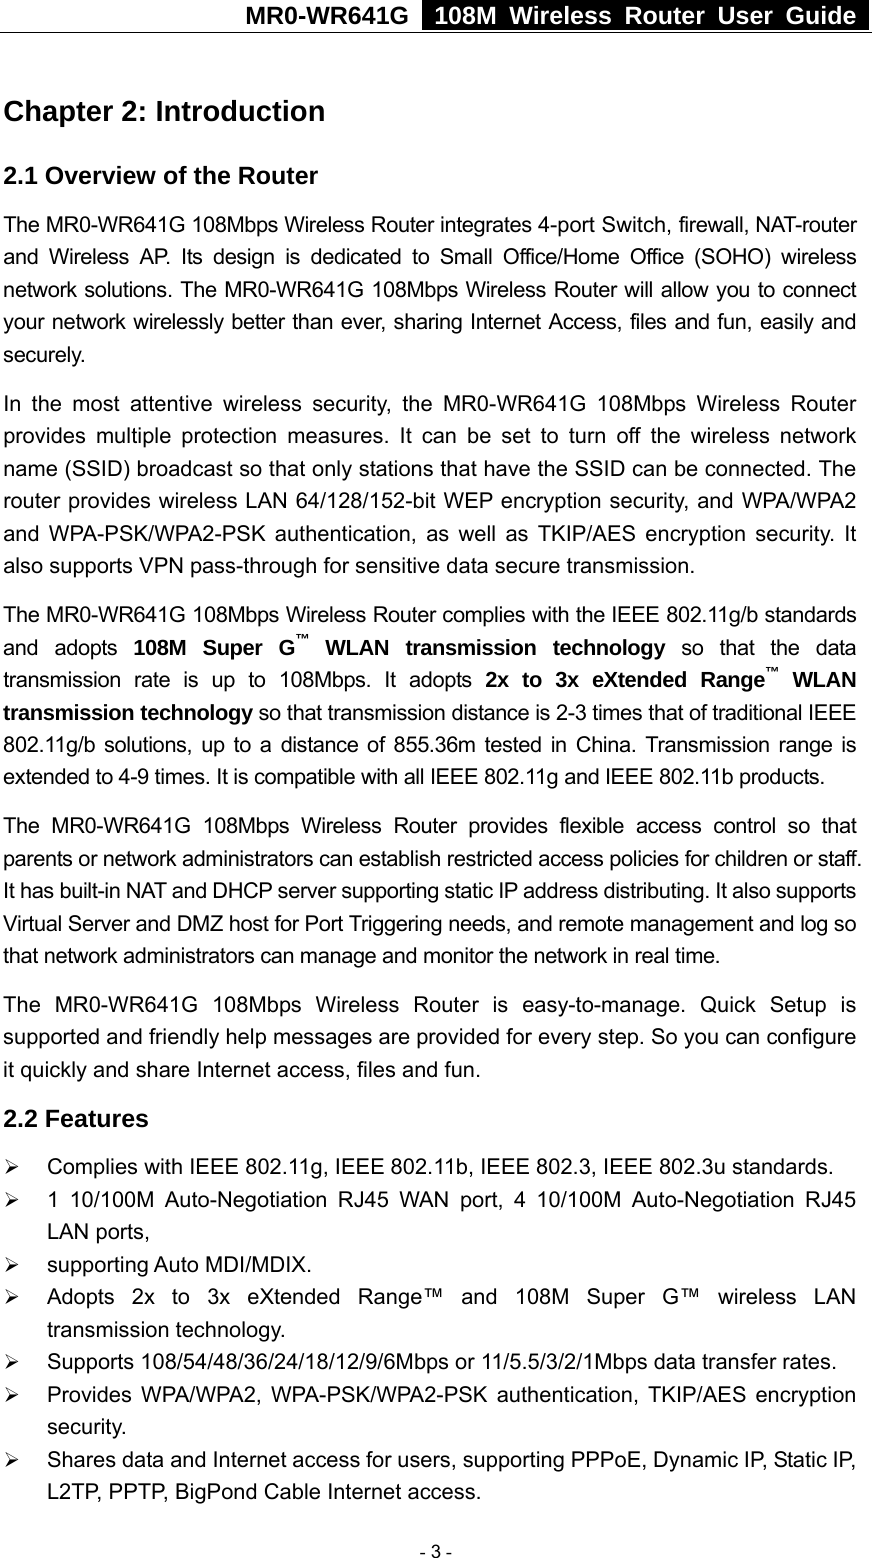 MR0-WR641G   108M Wireless Router User Guide  Chapter 2: Introduction 2.1 Overview of the Router The MR0-WR641G 108Mbps Wireless Router integrates 4-port Switch, firewall, NAT-router and Wireless AP. Its design is dedicated to Small Office/Home Office (SOHO) wireless network solutions. The MR0-WR641G 108Mbps Wireless Router will allow you to connect your network wirelessly better than ever, sharing Internet Access, files and fun, easily and securely. In the most attentive wireless security, the MR0-WR641G 108Mbps Wireless Router provides multiple protection measures. It can be set to turn off the wireless network name (SSID) broadcast so that only stations that have the SSID can be connected. The router provides wireless LAN 64/128/152-bit WEP encryption security, and WPA/WPA2 and WPA-PSK/WPA2-PSK authentication, as well as TKIP/AES encryption security. It also supports VPN pass-through for sensitive data secure transmission. The MR0-WR641G 108Mbps Wireless Router complies with the IEEE 802.11g/b standards and adopts 108M Super G™ WLAN transmission technology so that the data transmission rate is up to 108Mbps. It adopts 2x to 3x eXtended Range™ WLAN transmission technology so that transmission distance is 2-3 times that of traditional IEEE 802.11g/b solutions, up to a distance of 855.36m tested in China. Transmission range is extended to 4-9 times. It is compatible with all IEEE 802.11g and IEEE 802.11b products. The MR0-WR641G 108Mbps Wireless Router provides flexible access control so that parents or network administrators can establish restricted access policies for children or staff. It has built-in NAT and DHCP server supporting static IP address distributing. It also supports Virtual Server and DMZ host for Port Triggering needs, and remote management and log so that network administrators can manage and monitor the network in real time.   The MR0-WR641G 108Mbps Wireless Router is easy-to-manage. Quick Setup is supported and friendly help messages are provided for every step. So you can configure it quickly and share Internet access, files and fun. 2.2 Features ¾ Complies with IEEE 802.11g, IEEE 802.11b, IEEE 802.3, IEEE 802.3u standards. ¾ 1 10/100M Auto-Negotiation RJ45 WAN port, 4 10/100M Auto-Negotiation RJ45 LAN ports, ¾ supporting Auto MDI/MDIX. ¾ Adopts 2x to 3x eXtended Range™ and 108M Super G™ wireless LAN transmission technology. ¾ Supports 108/54/48/36/24/18/12/9/6Mbps or 11/5.5/3/2/1Mbps data transfer rates. ¾ Provides WPA/WPA2, WPA-PSK/WPA2-PSK authentication, TKIP/AES encryption security. ¾ Shares data and Internet access for users, supporting PPPoE, Dynamic IP, Static IP, L2TP, PPTP, BigPond Cable Internet access.  - 3 - 